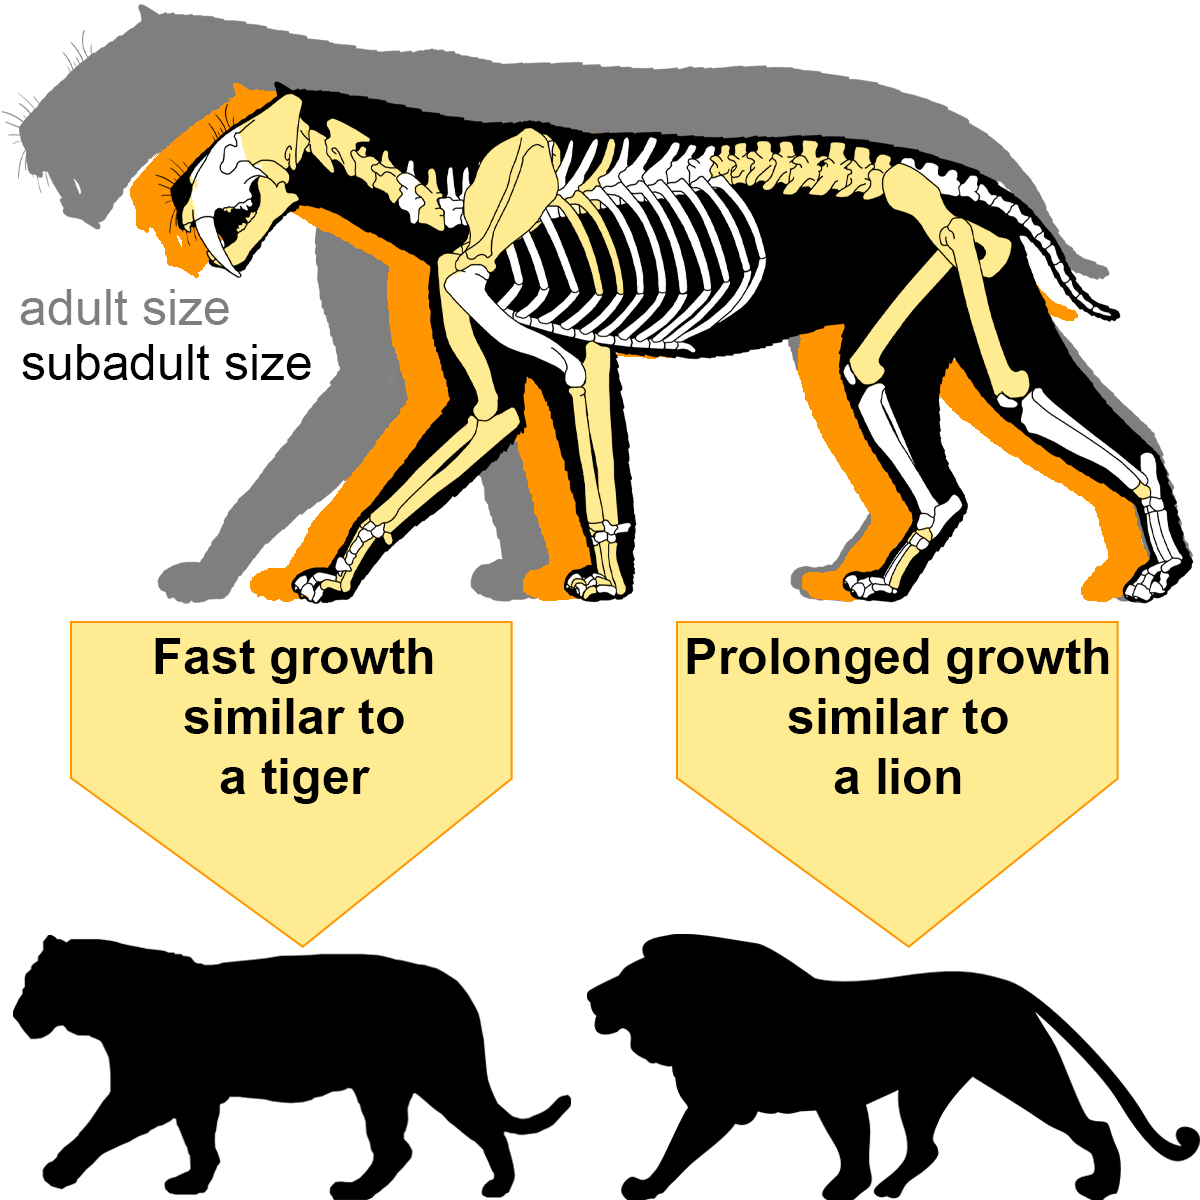 This suggests that Smilodon fatalis was doing something a little different from BOTH lions and tigers. It grew quickly, like a tiger, but they probably stayed reliant on their mother for a long time, similar to a lion!